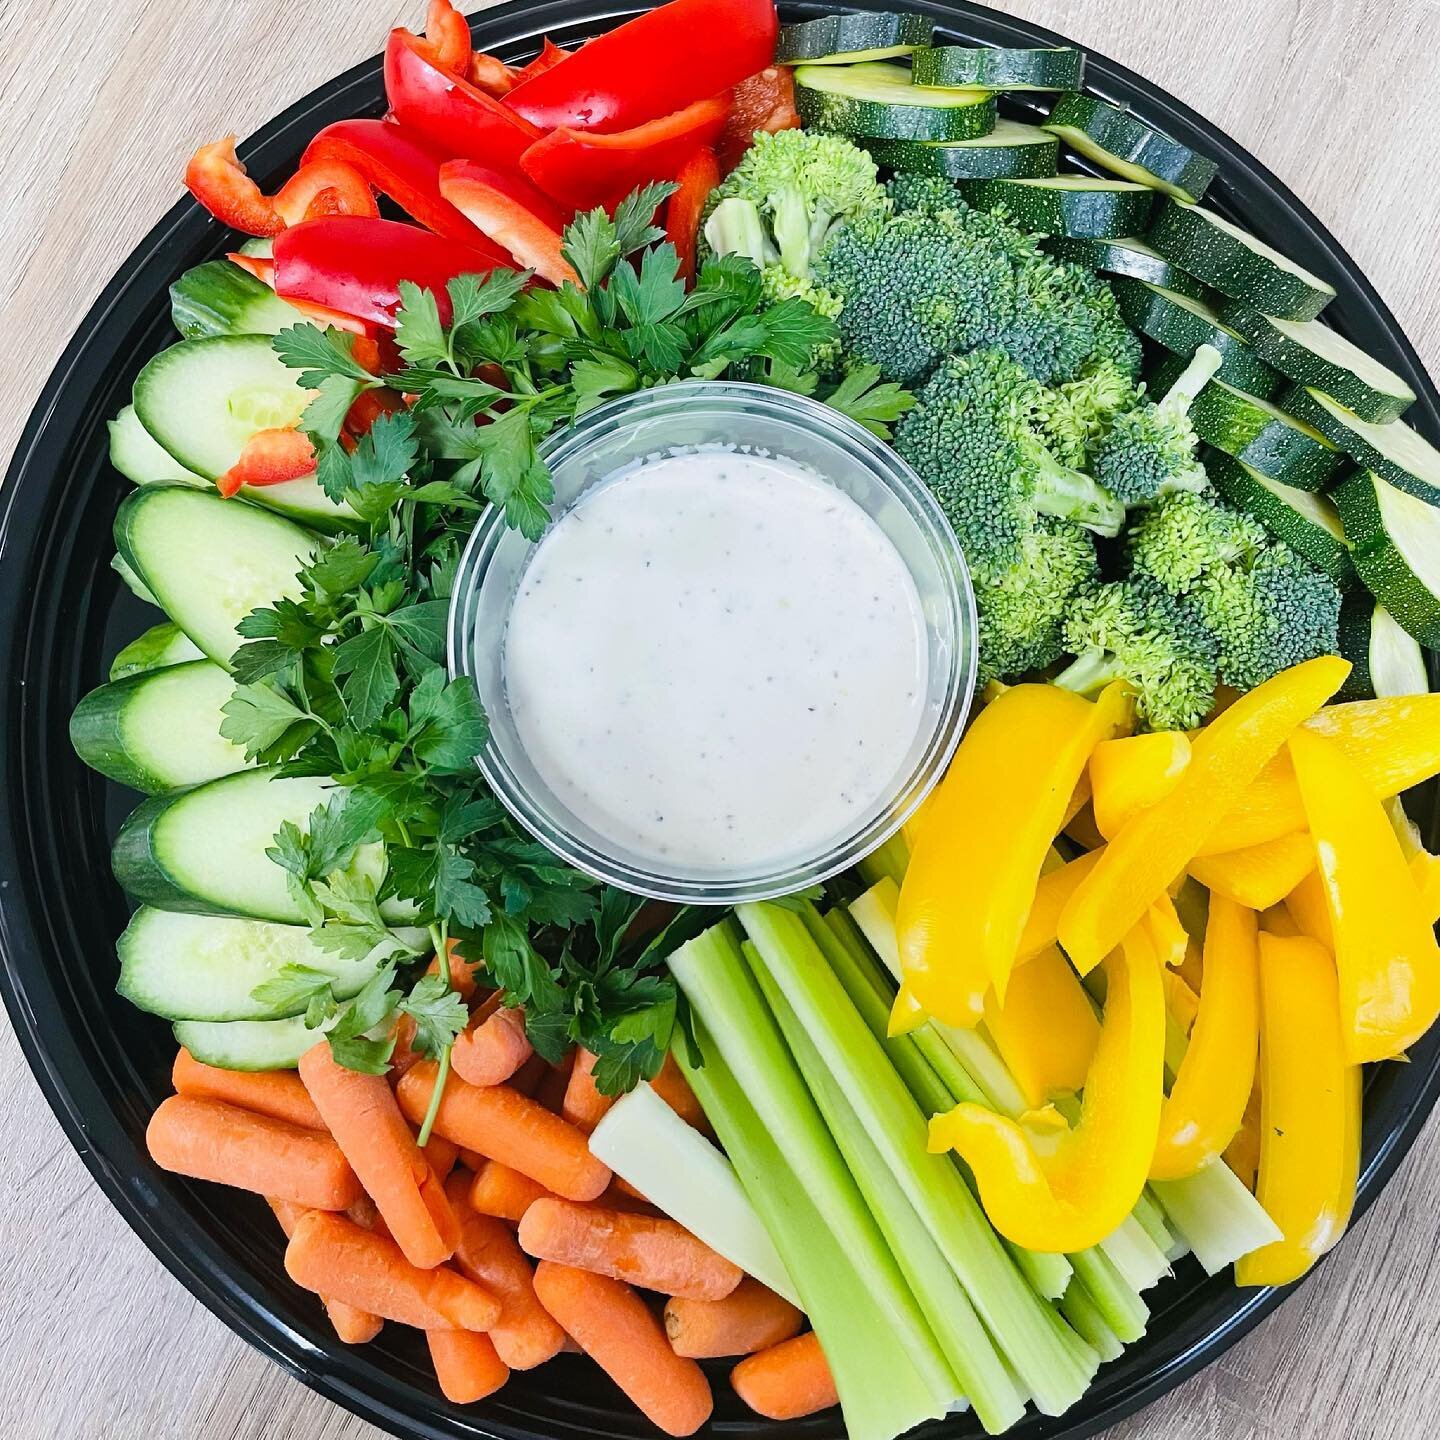 How good does a big old platter of crudit&eacute; sound today? Sometimes seen as the &ldquo;filler&rdquo; item on a buffet, fresh 🥦 veggies are always a great choice for kids and adults alike and a great addition on a hot ☀️day!